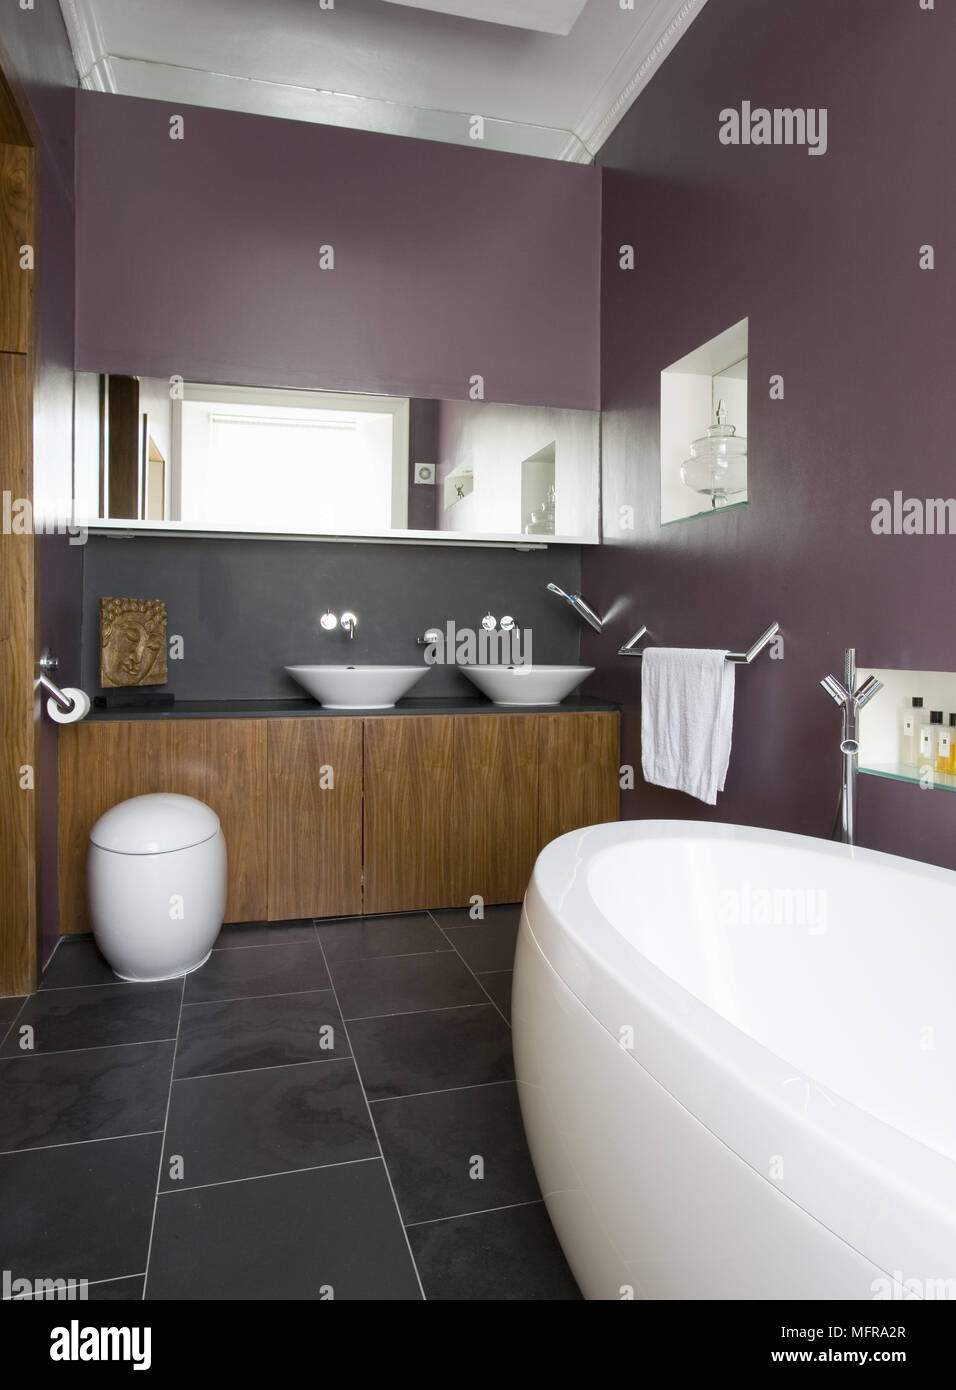 Pair of washbasins set on cupboard unit in contemporary plum colour bathroom Stock Photo